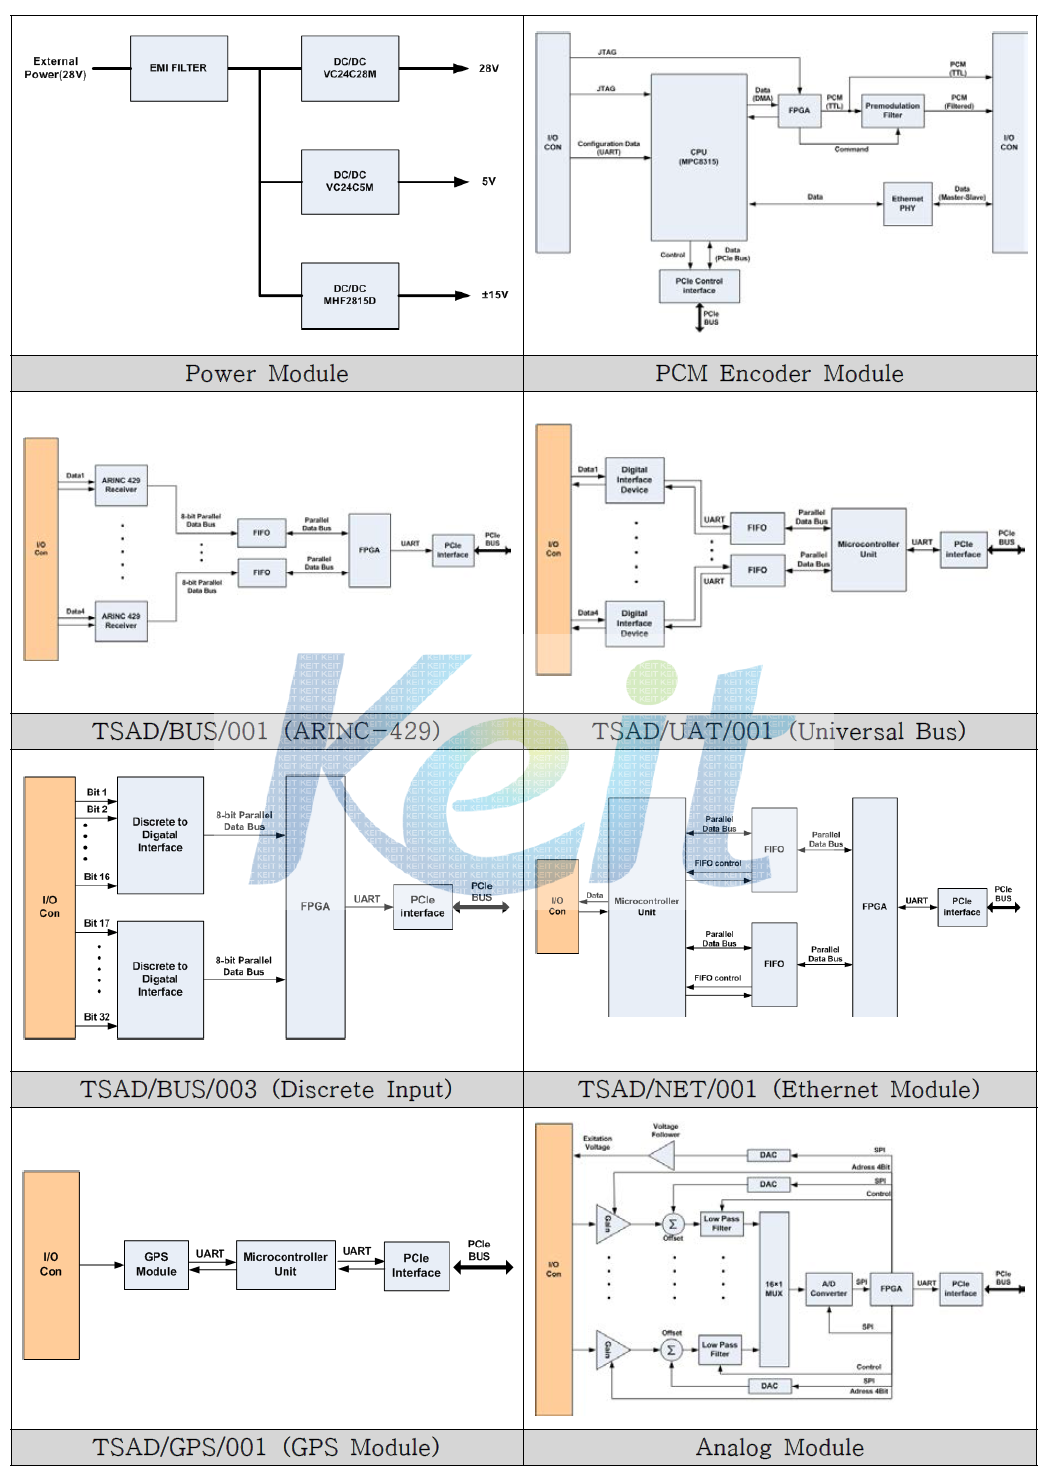 Data Acquisition System & Signal Conditioning Module 상세설계